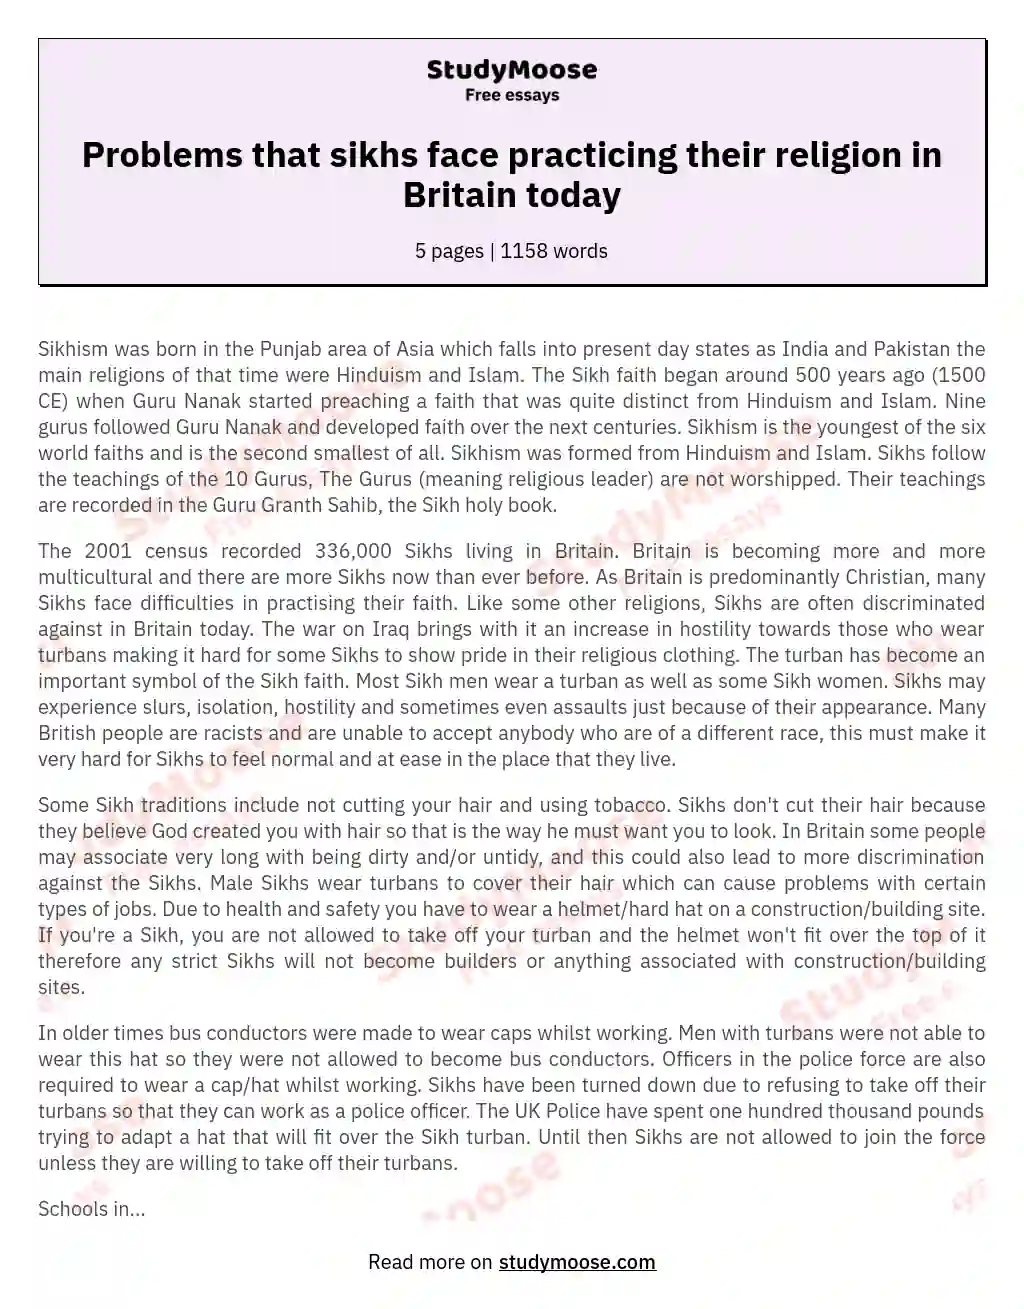 Problems that sikhs face practicing their religion in Britain today